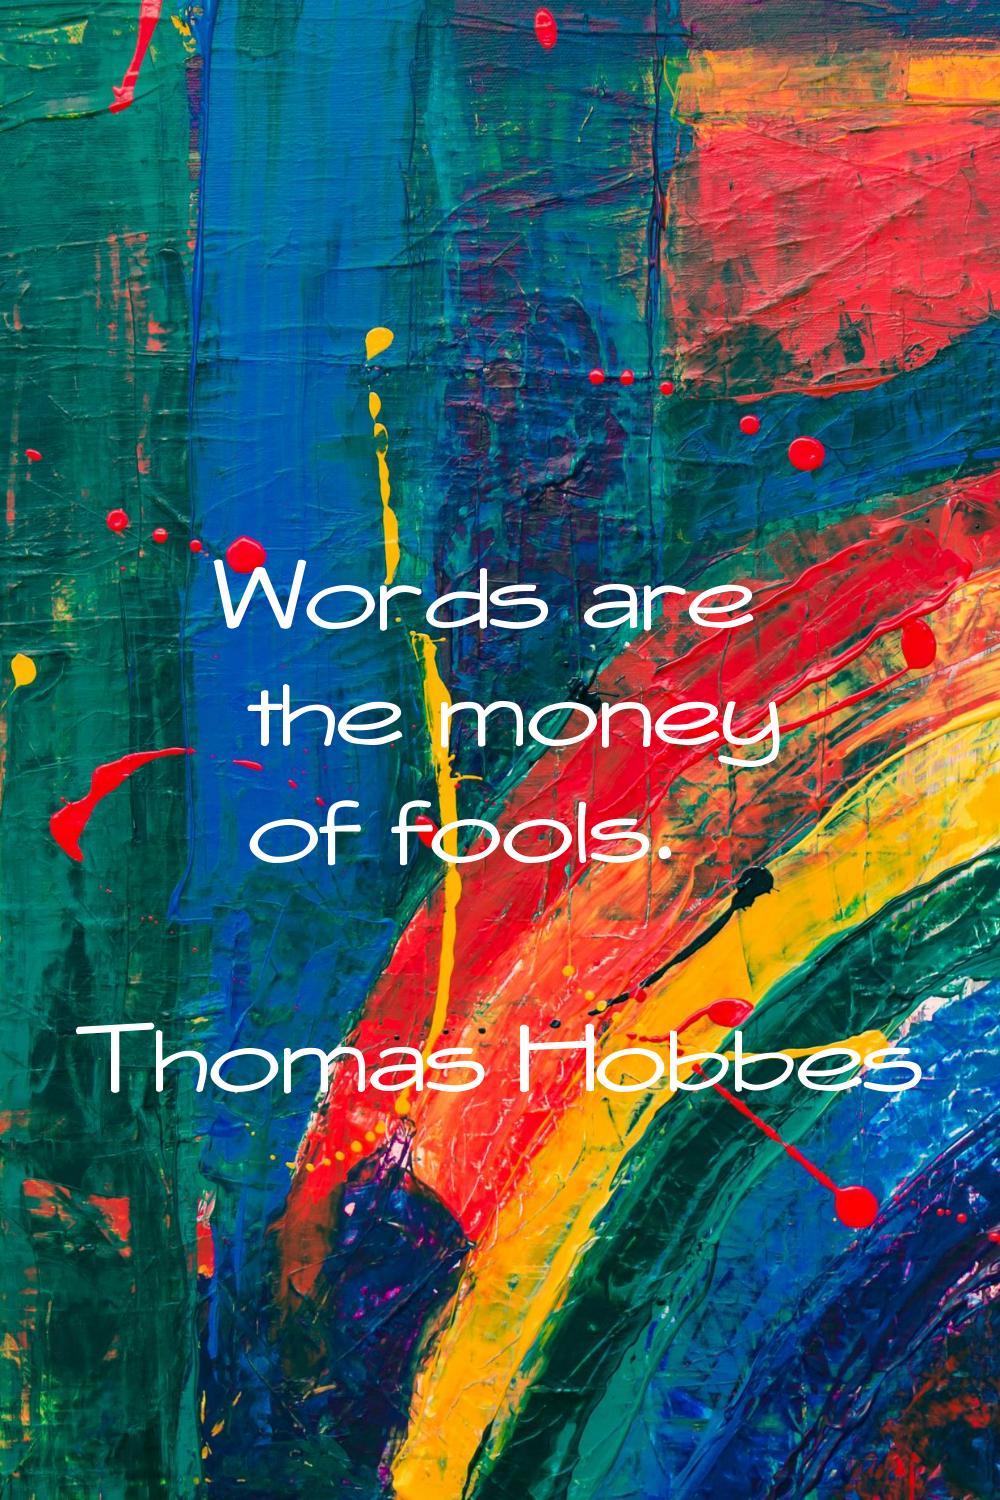 Words are the money of fools.